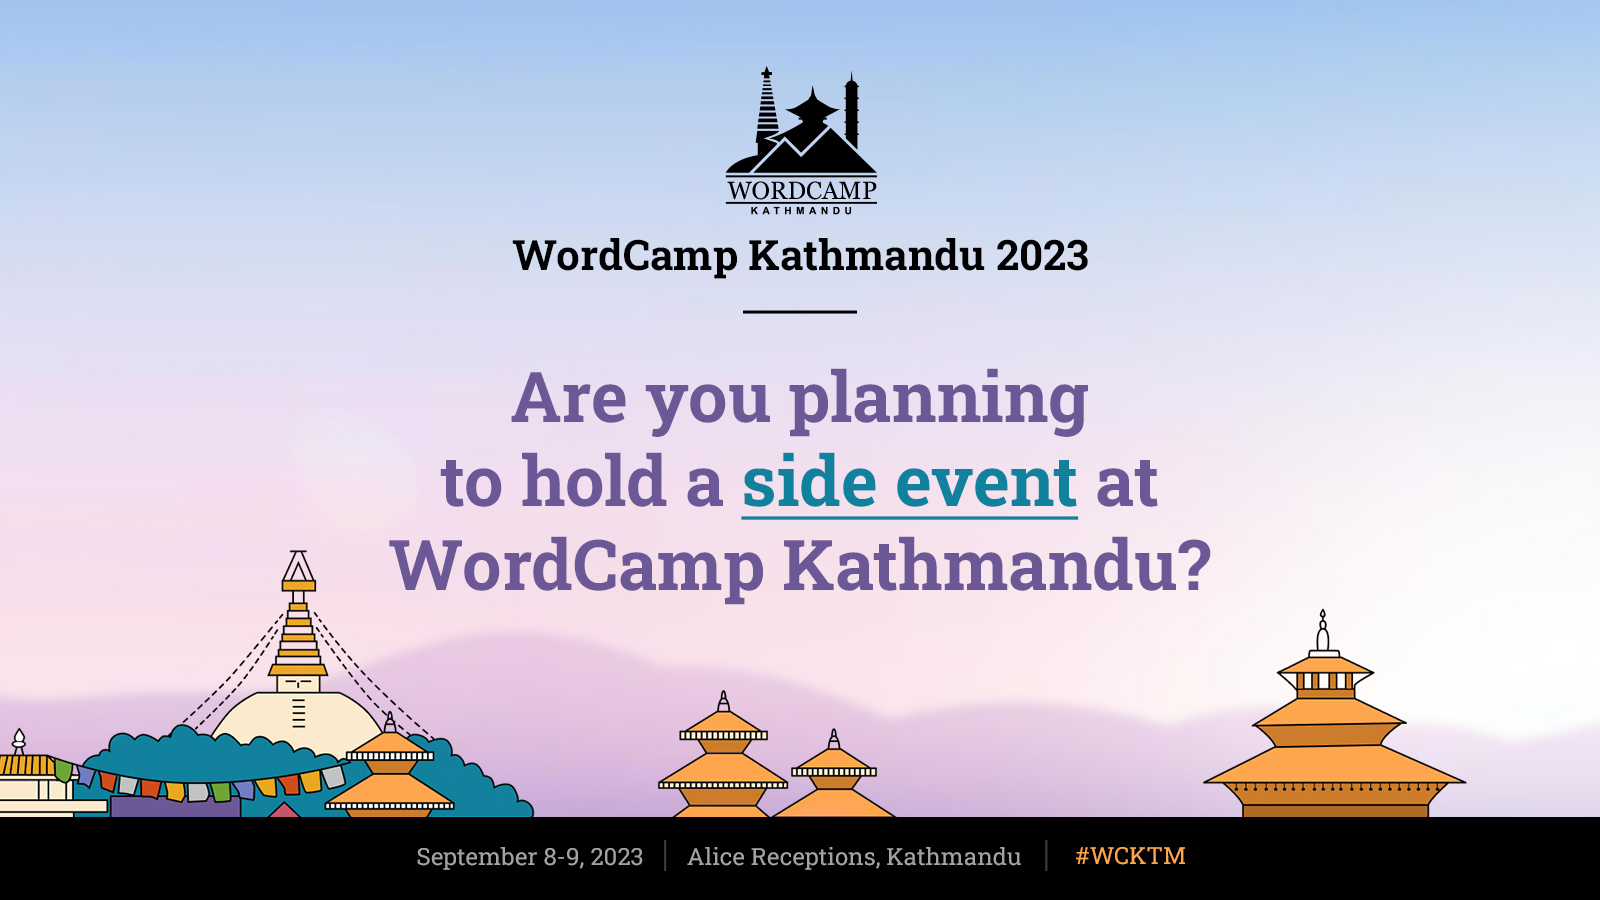 Are you planning to hold a side event at WordCamp Kathmandu?